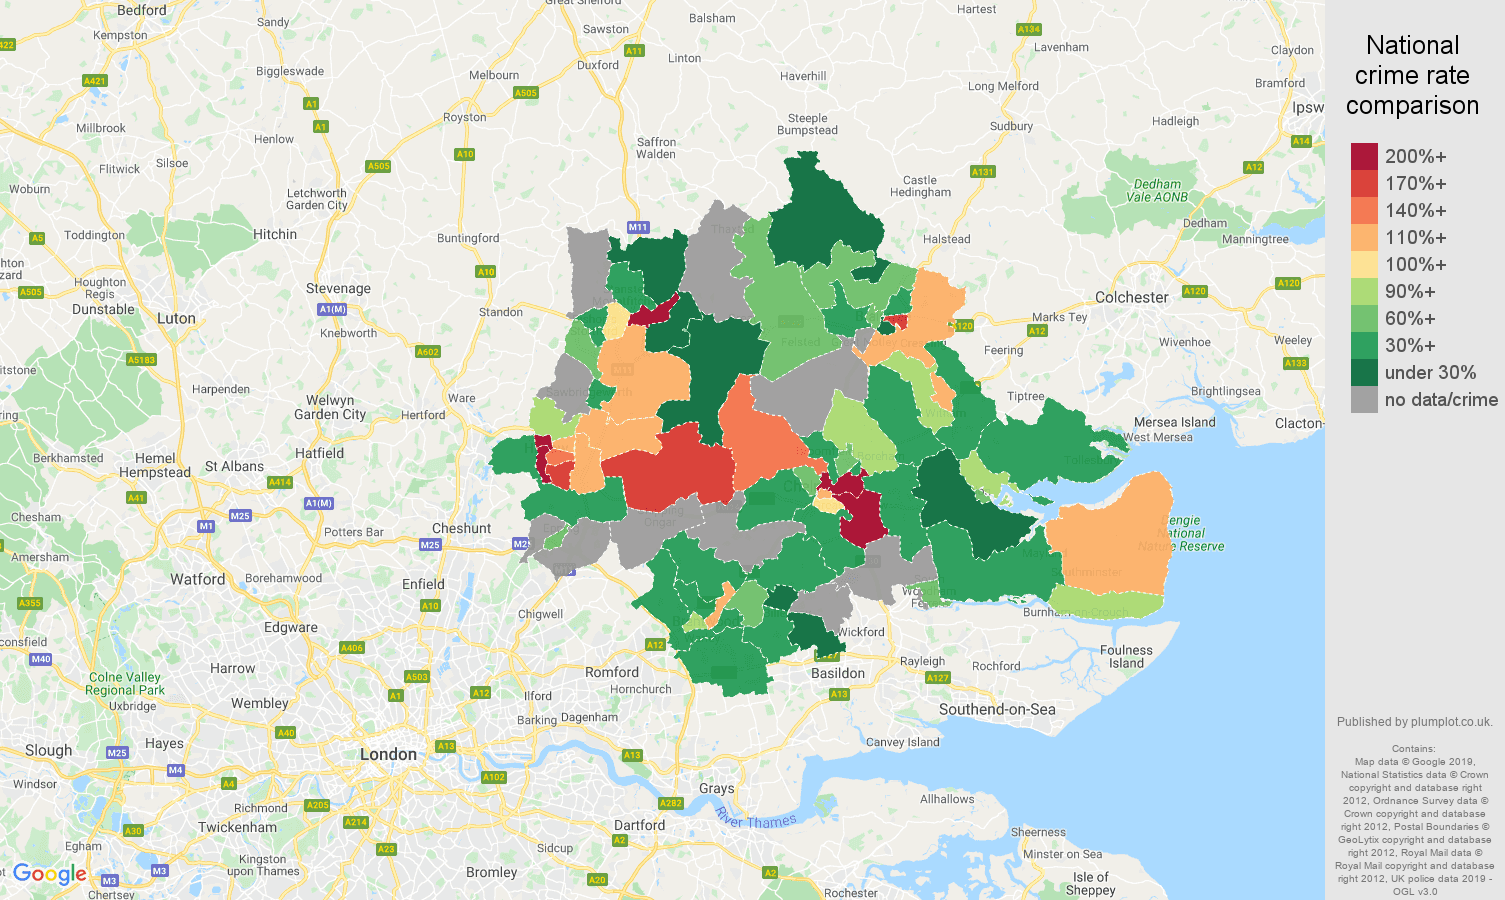 Chelmsford possession of weapons crime rate comparison map